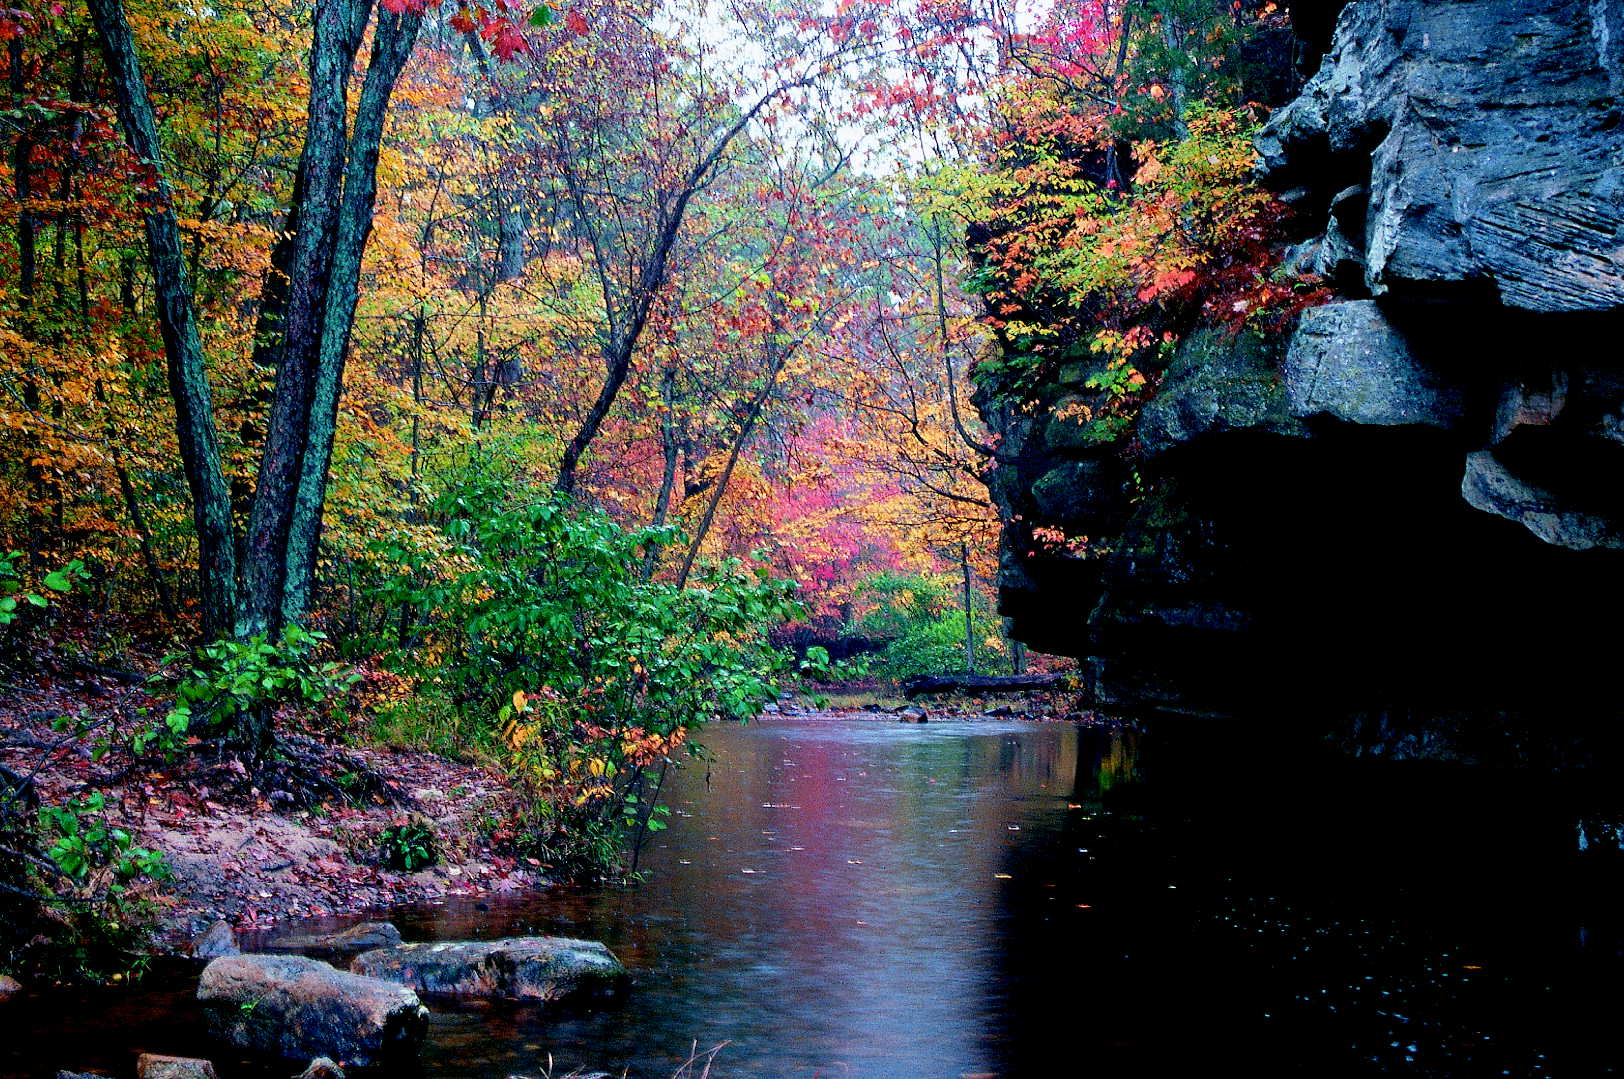 trees with bright fall colors along the stream with a bluff on the other side